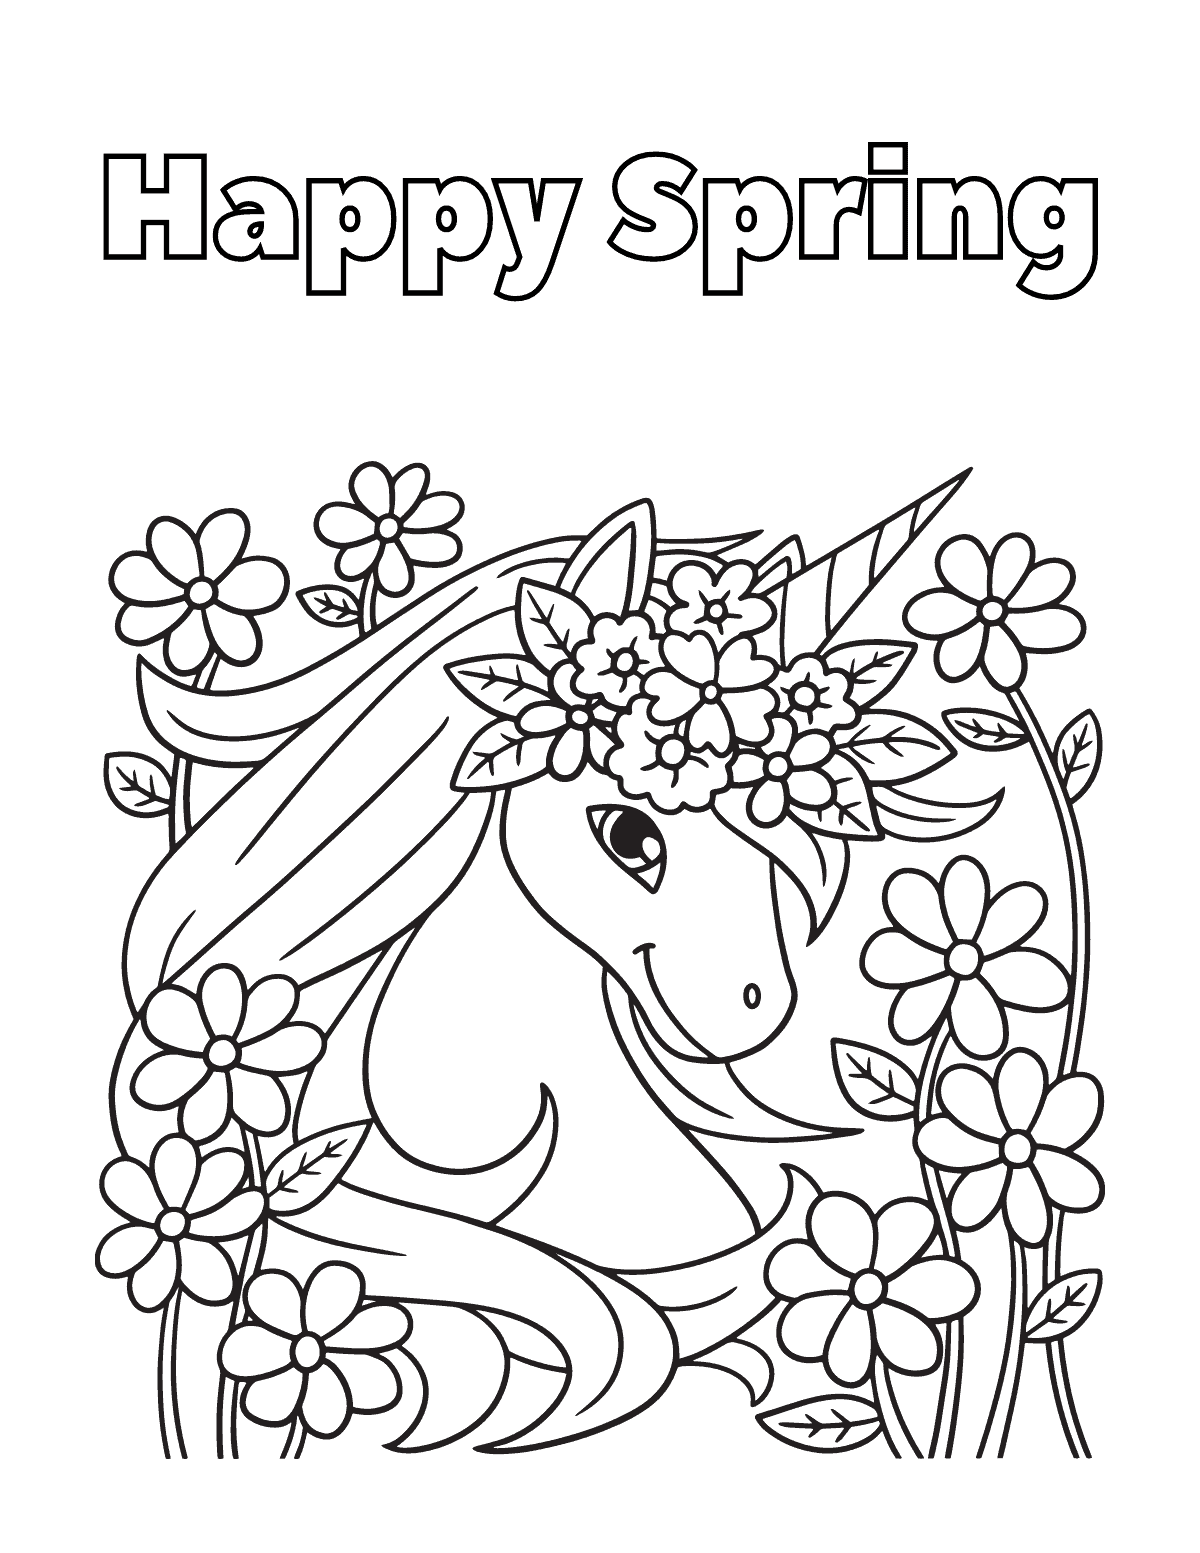 Happy Spring Unicorn Coloring Page